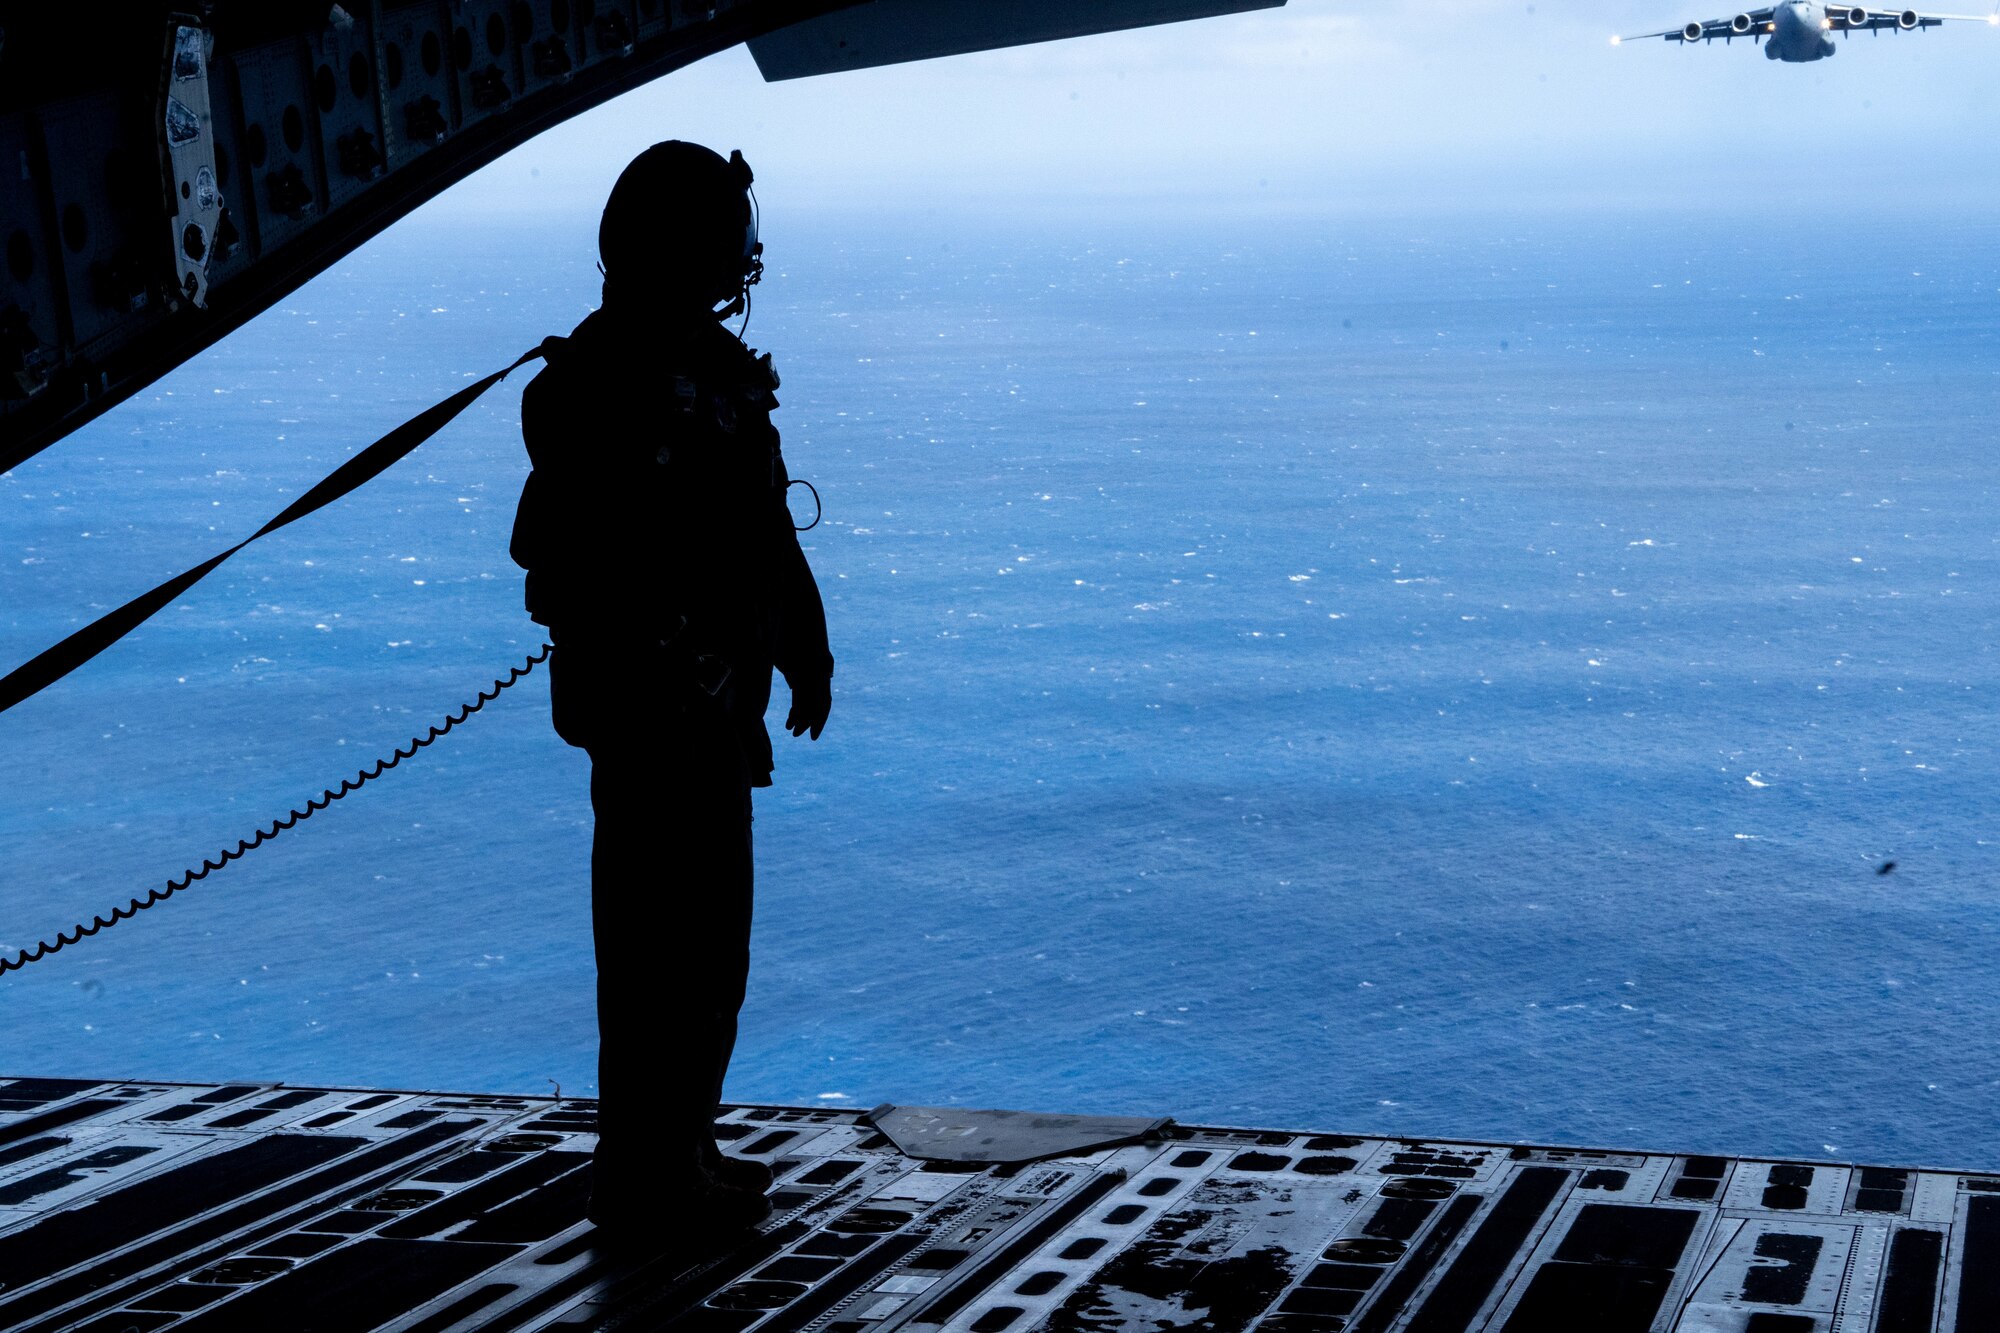 U.S. Air Force Senior Master Sgt. Kale Barney, 201st Air Mobility Operations Squadron loadmaster, stands at the end of the ramp of a C-17 Globemaster III watching a Royal Australian Air Force C-17 during Exercise Global Dexterity 2022 at Joint Base Pearl Harbor-Hickam, Hawaii, May 4, 2022. Exercise Global Dexterity 2022 is designed to help develop the bilateral tactical airlift and airdrop capabilities of the U.S. Air Force and the Royal Australian Air Force. (U.S. Air Force photo by Airman 1st Class Makensie Cooper)